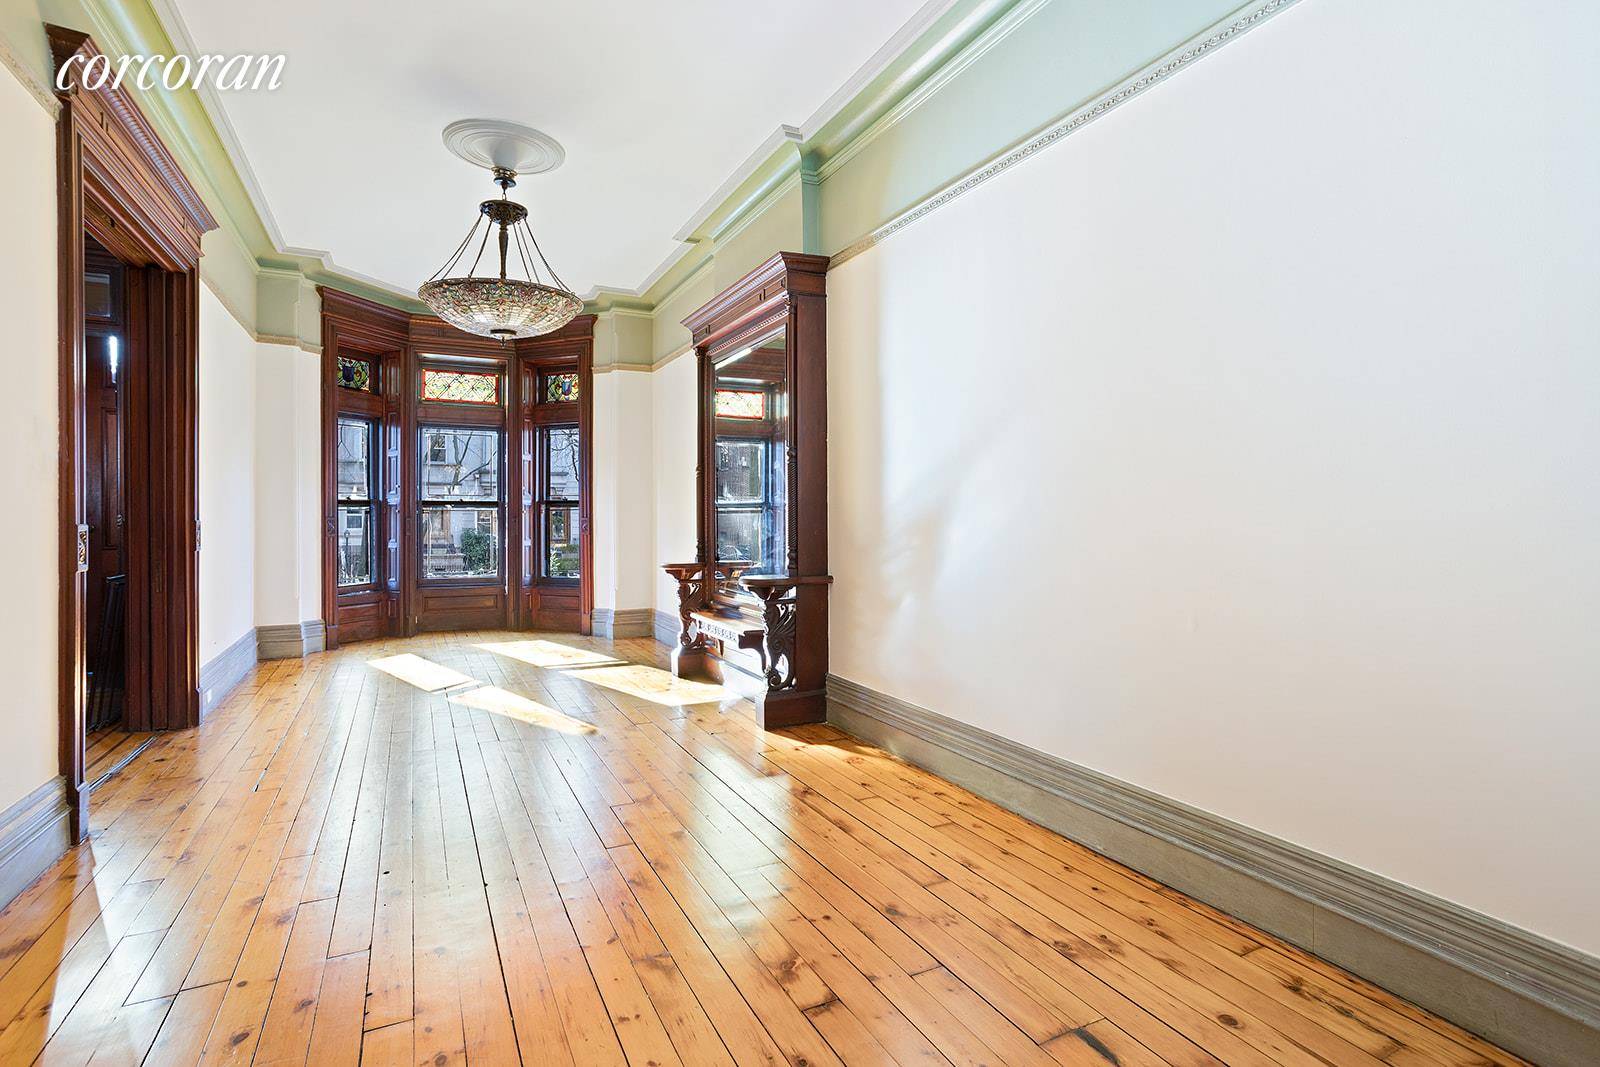 555 Third Street A Upper Triplex Now Available for Rent Sunlight streams through the top three floors of this grand Third Street townhouse between 7th and 8th Avenues in Park ...